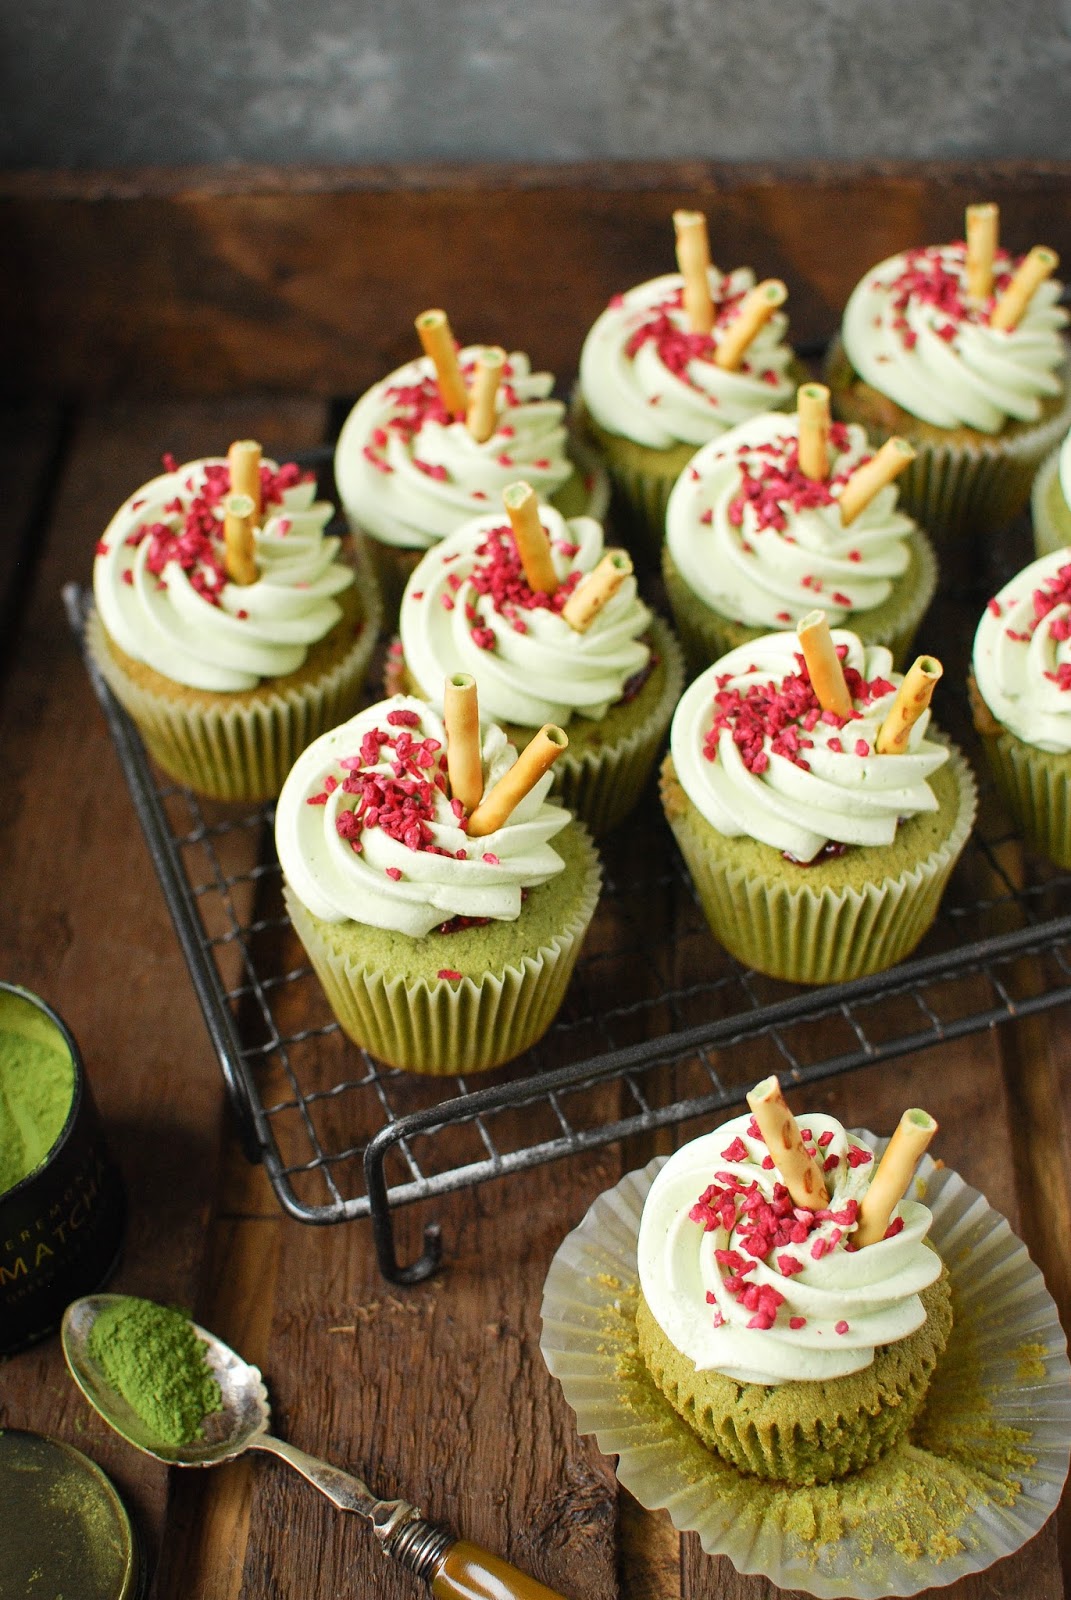 Green tea infused cupcakes filled with a sweet raspberry jam. A match made in heaven.